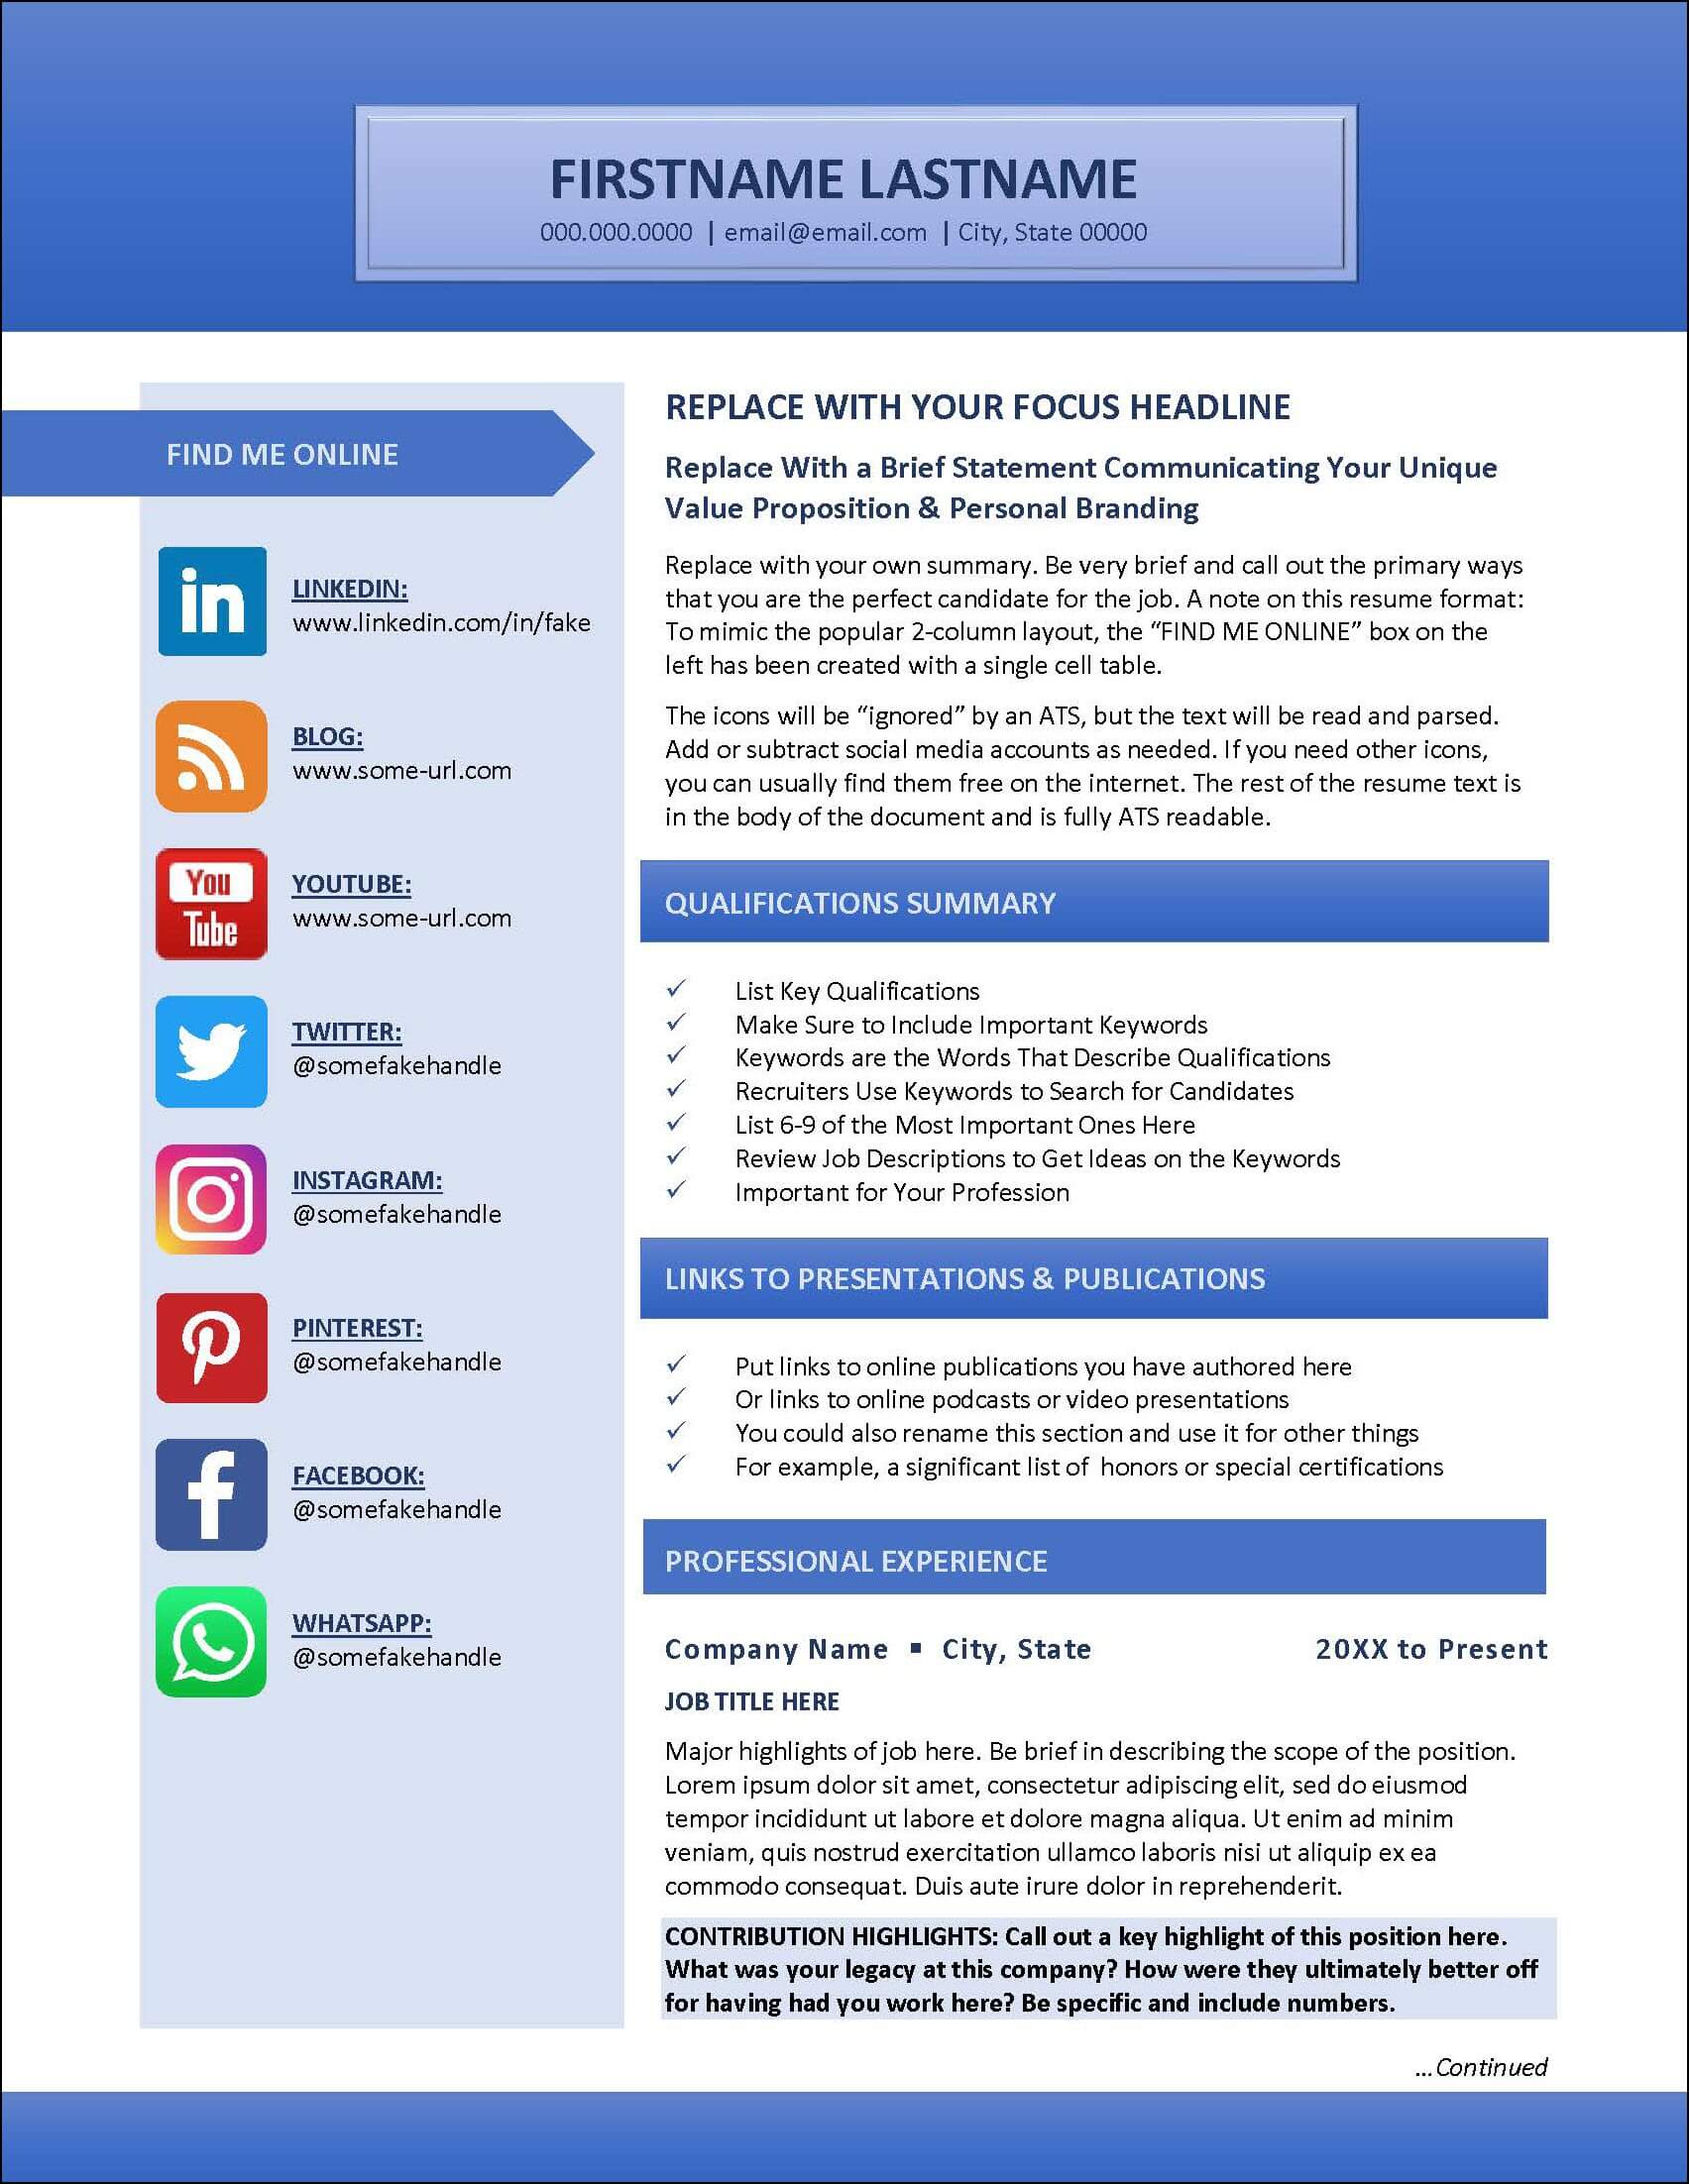 Social Media on Resume Page 1